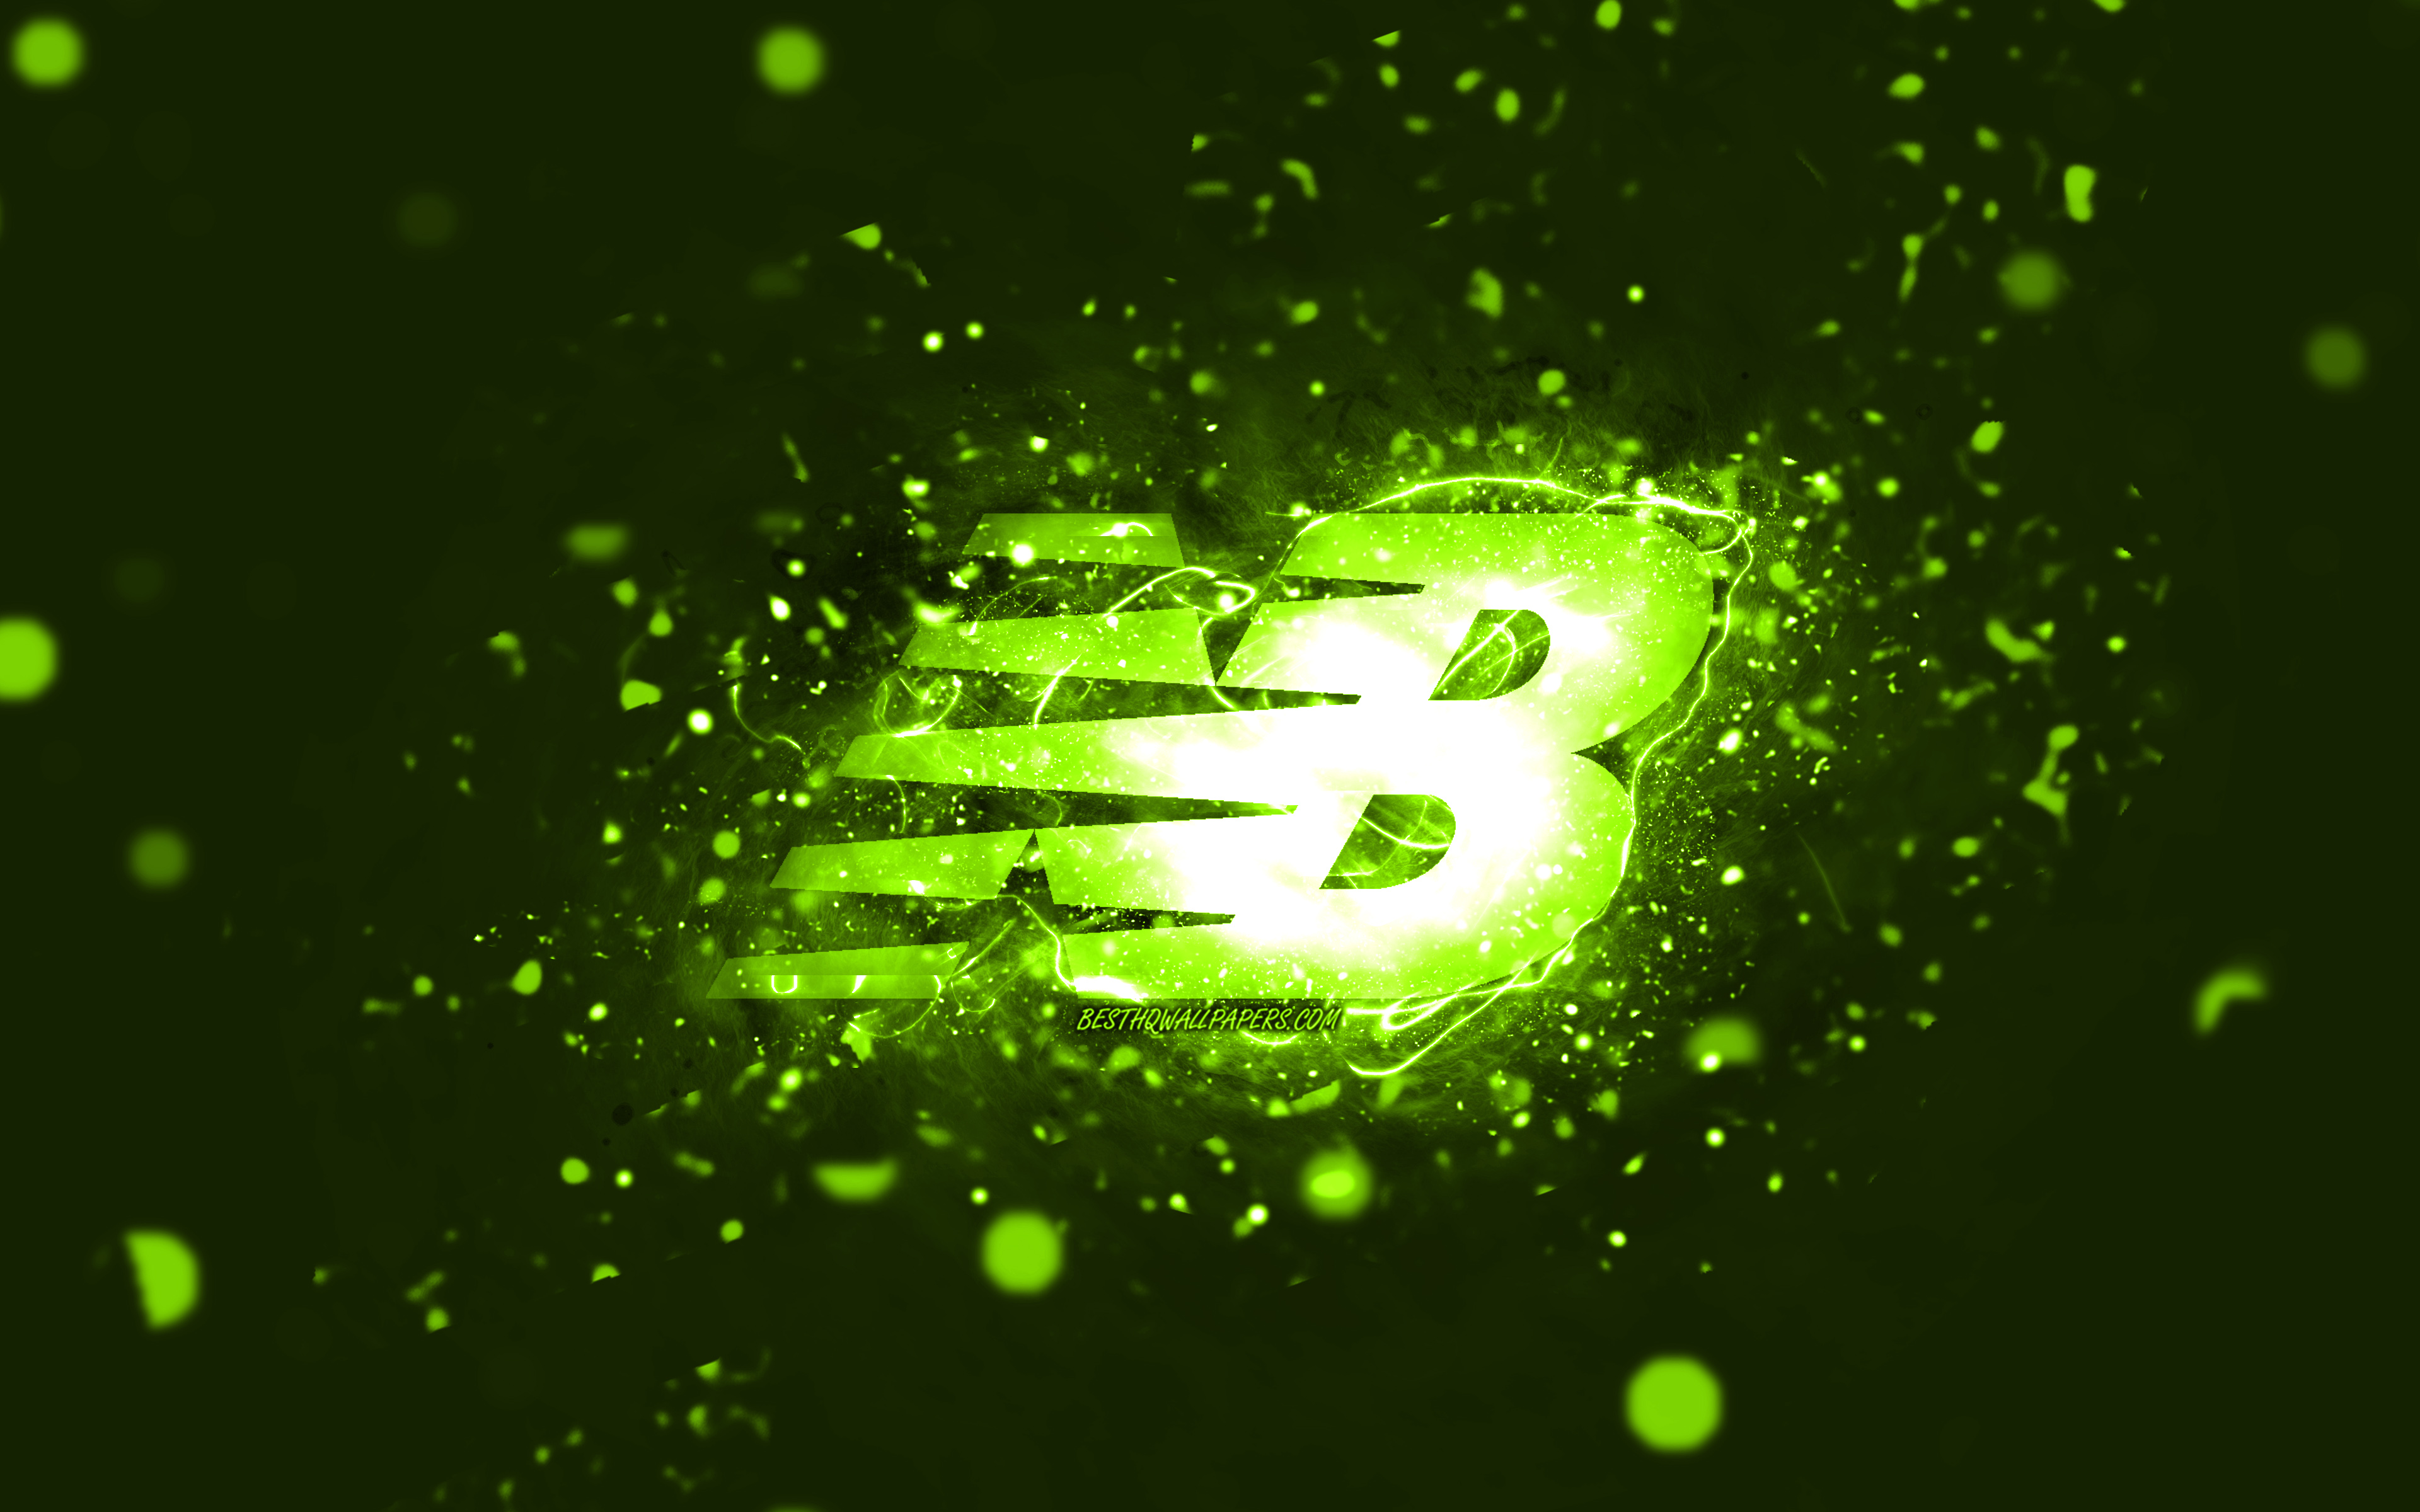 Download wallpaper New Balance lime logo, 4k, lime neon lights, creative, lime abstract background, New Balance logo, fashion brands, New Balance for desktop with resolution 3840x2400. High Quality HD picture wallpaper